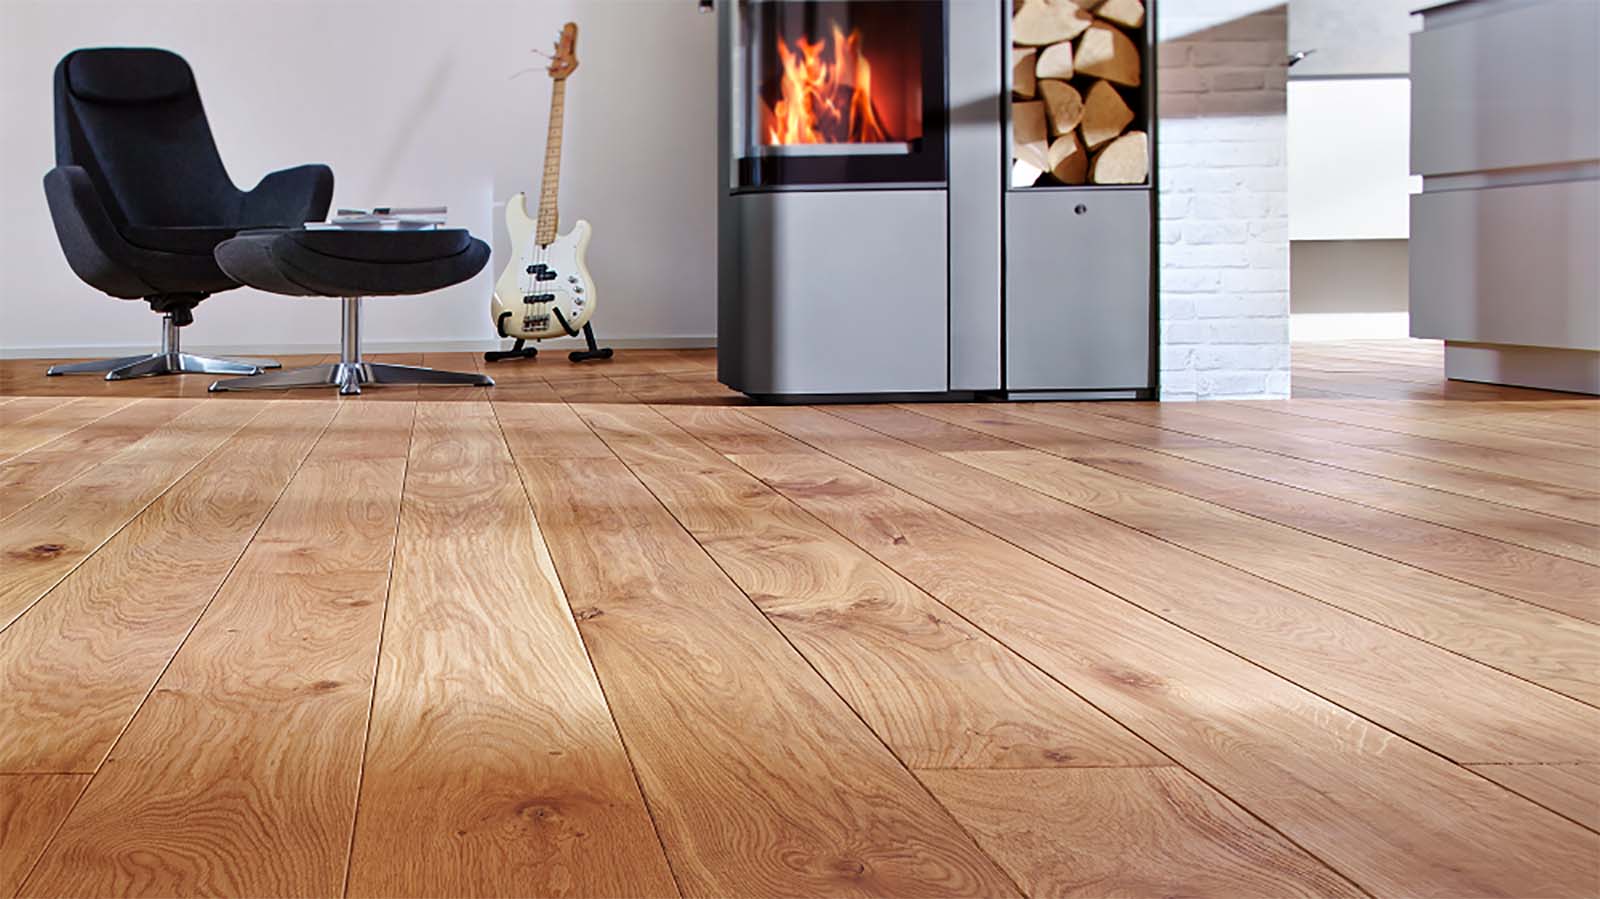 If you’re looking for a hardwax oil protector for your wooden floor, then the Osmo Polyx-Oil is the product for you...